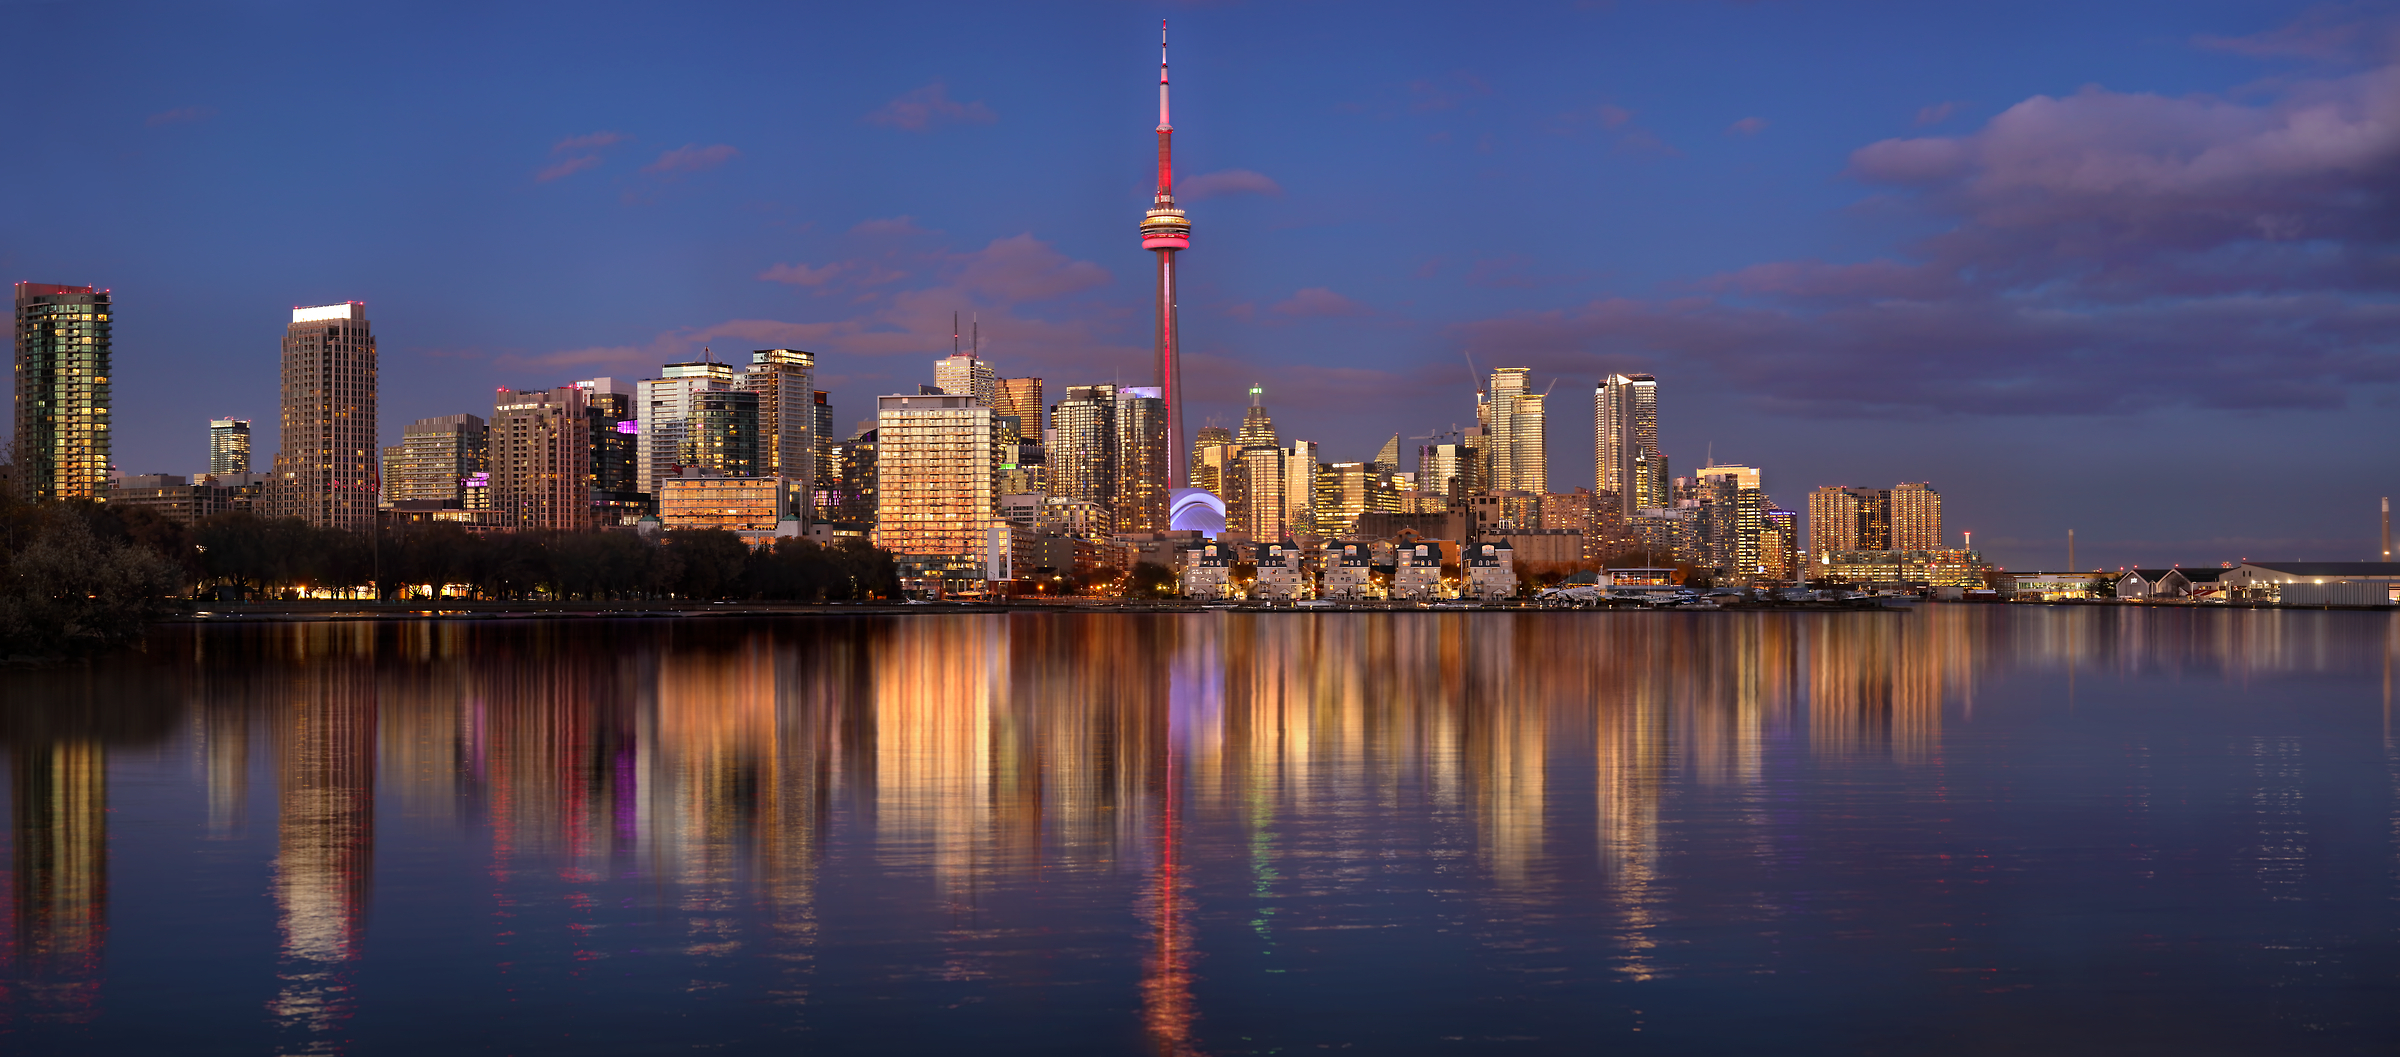 533 megapixels! A very high resolution, large-format VAST photo print of the Toronto skyline at dusk with Lake Ontario in the foreground; cityscape photograph created by Phil Crawshay in Downtown Toronto, Ontario, Canada.